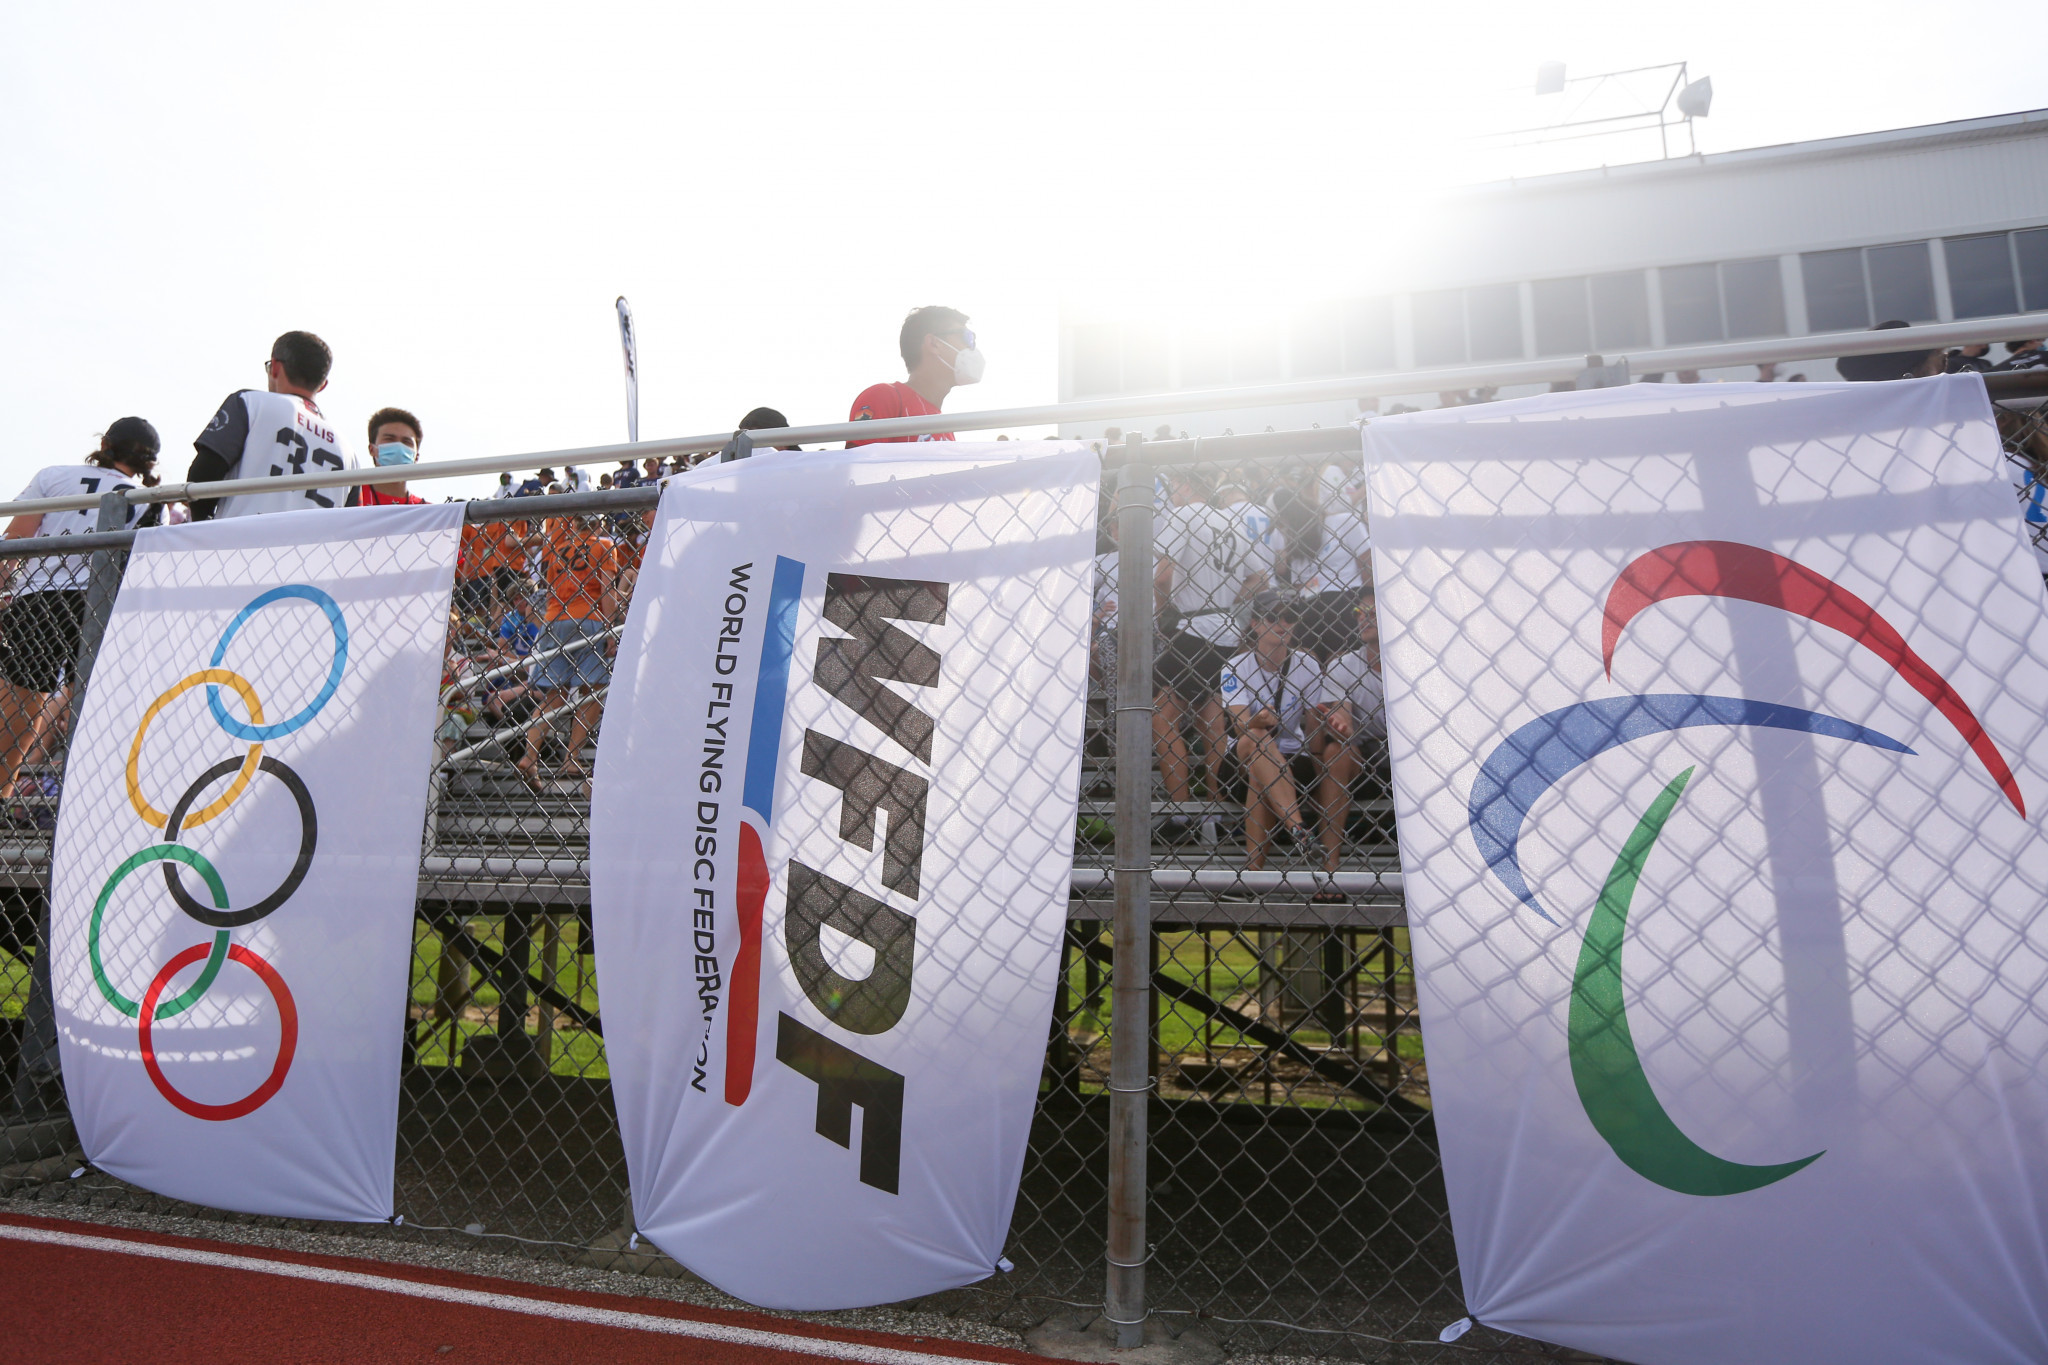 The first day of the World Ultimate Club Championships was staged at the Atrium Stadium ©Paul Rutherford for Ultiphotos